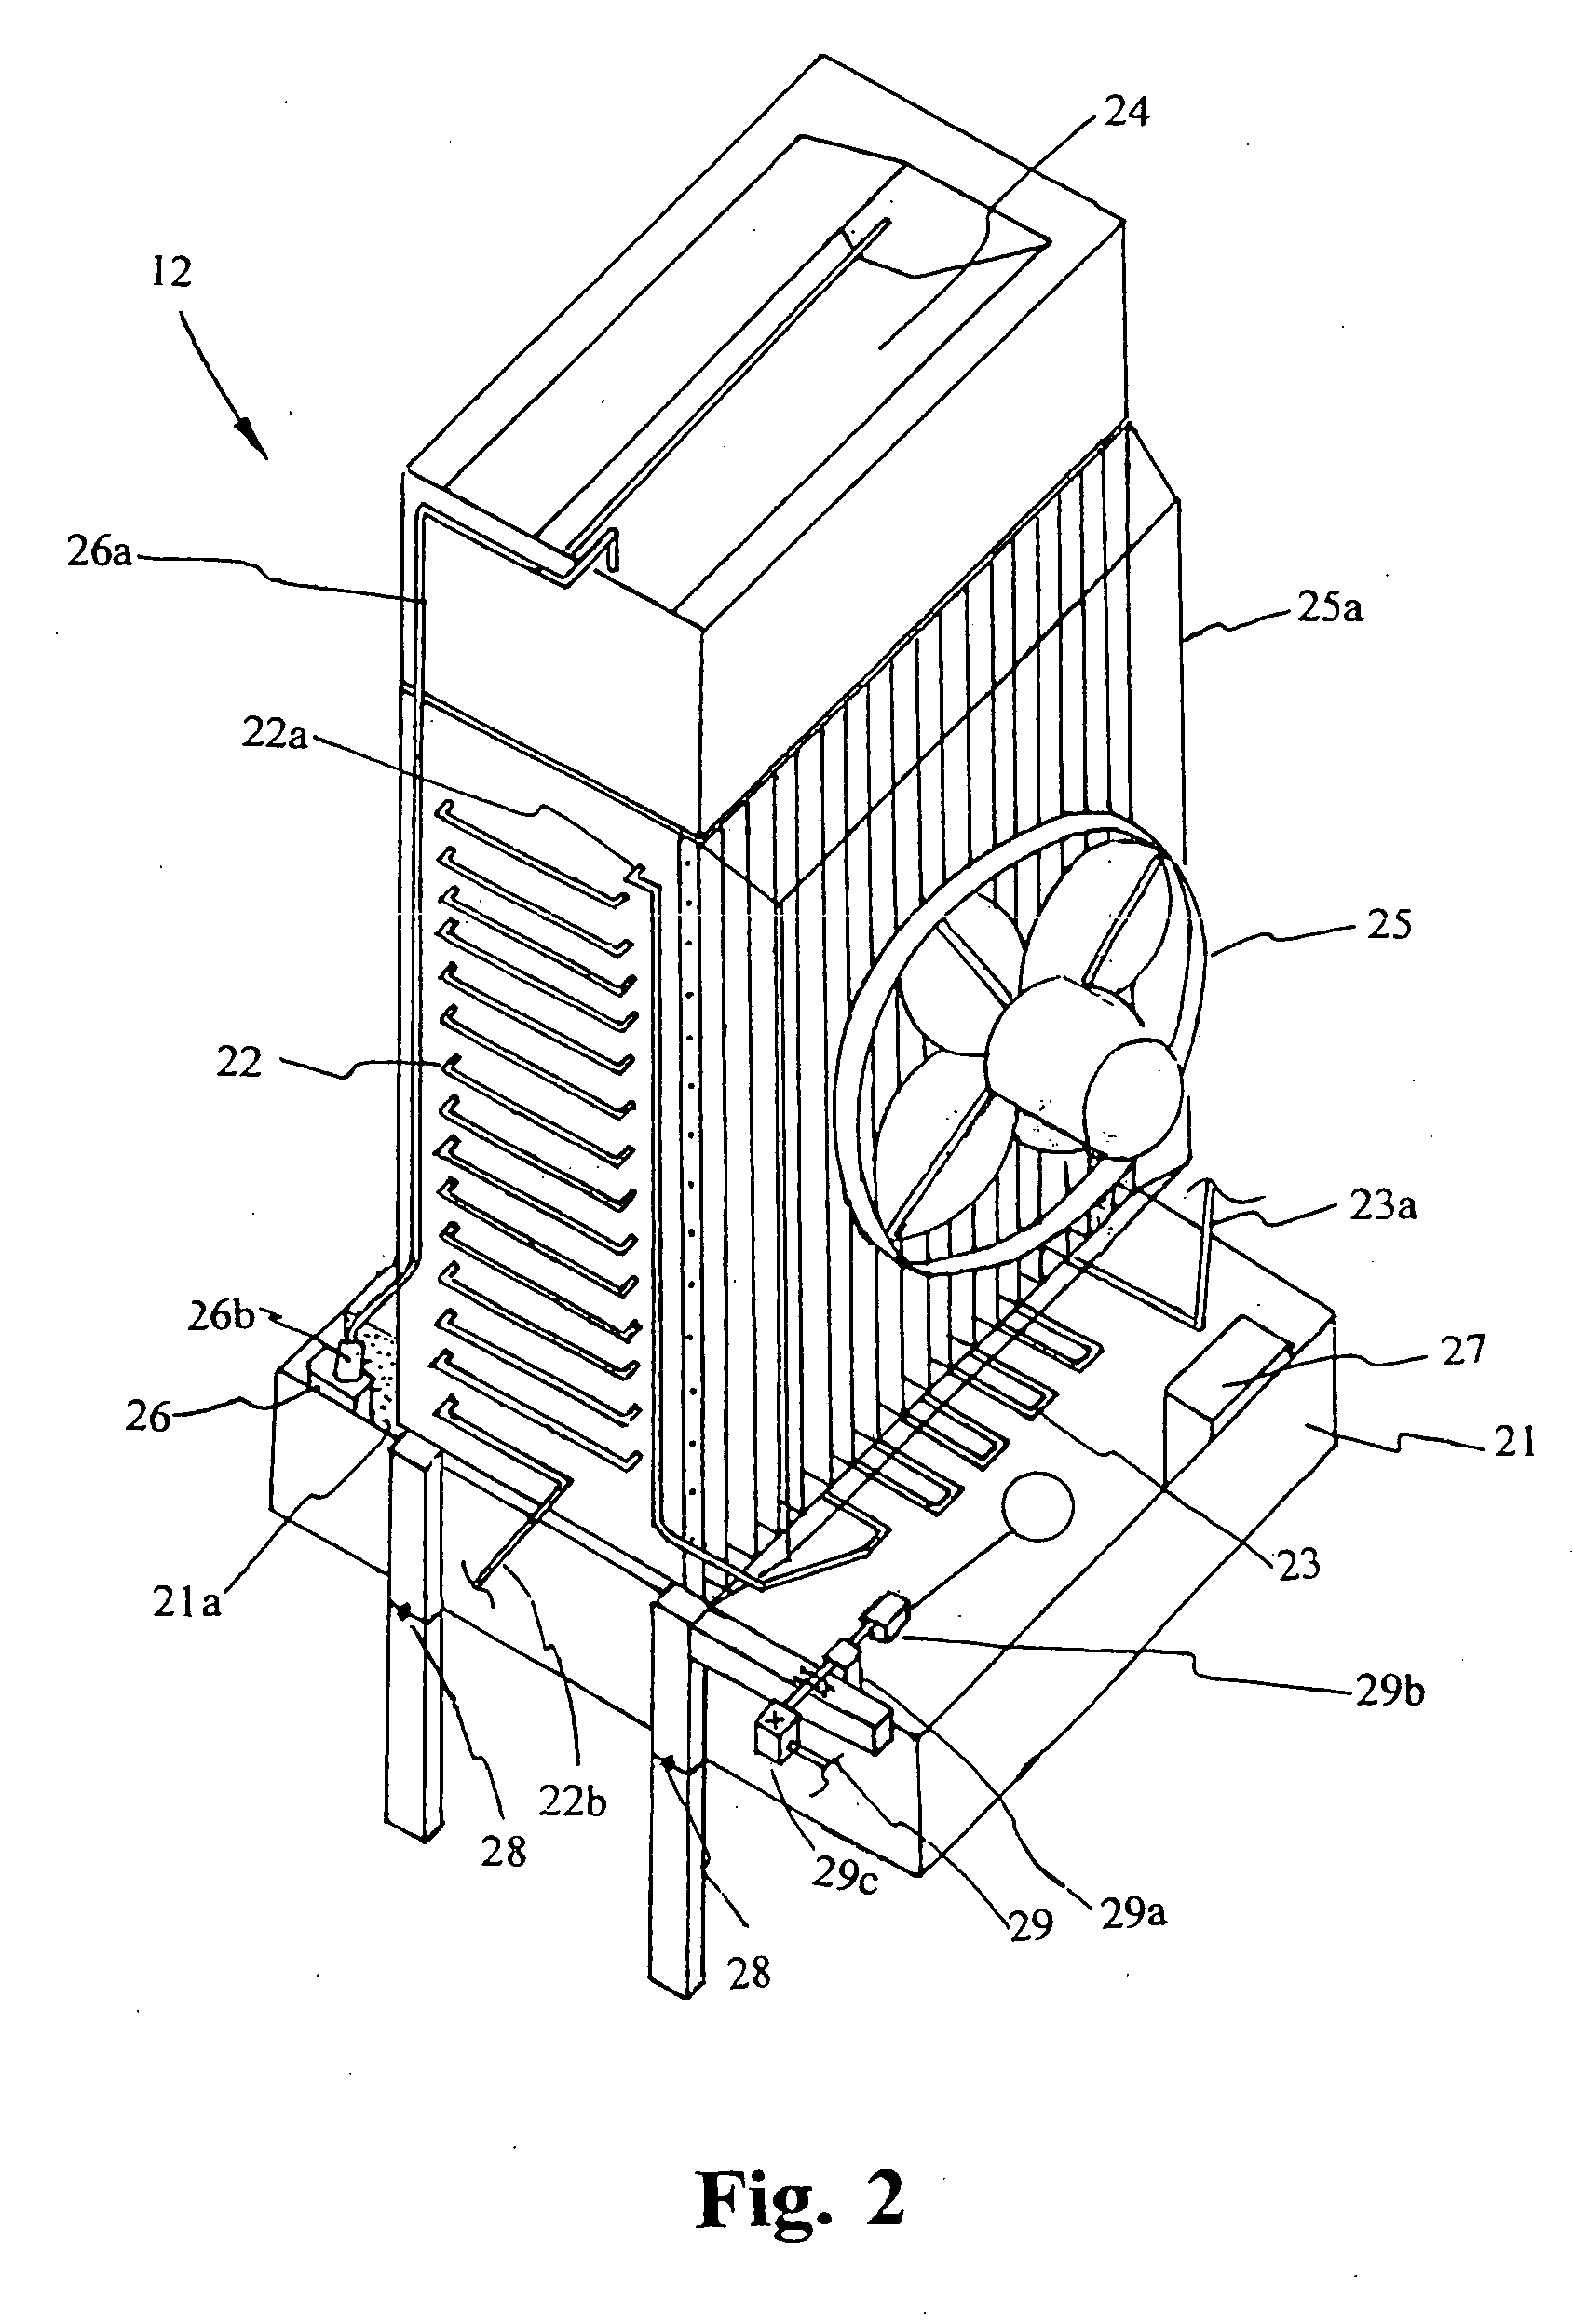 Condenser and metering device in refrigeration system for saving energy